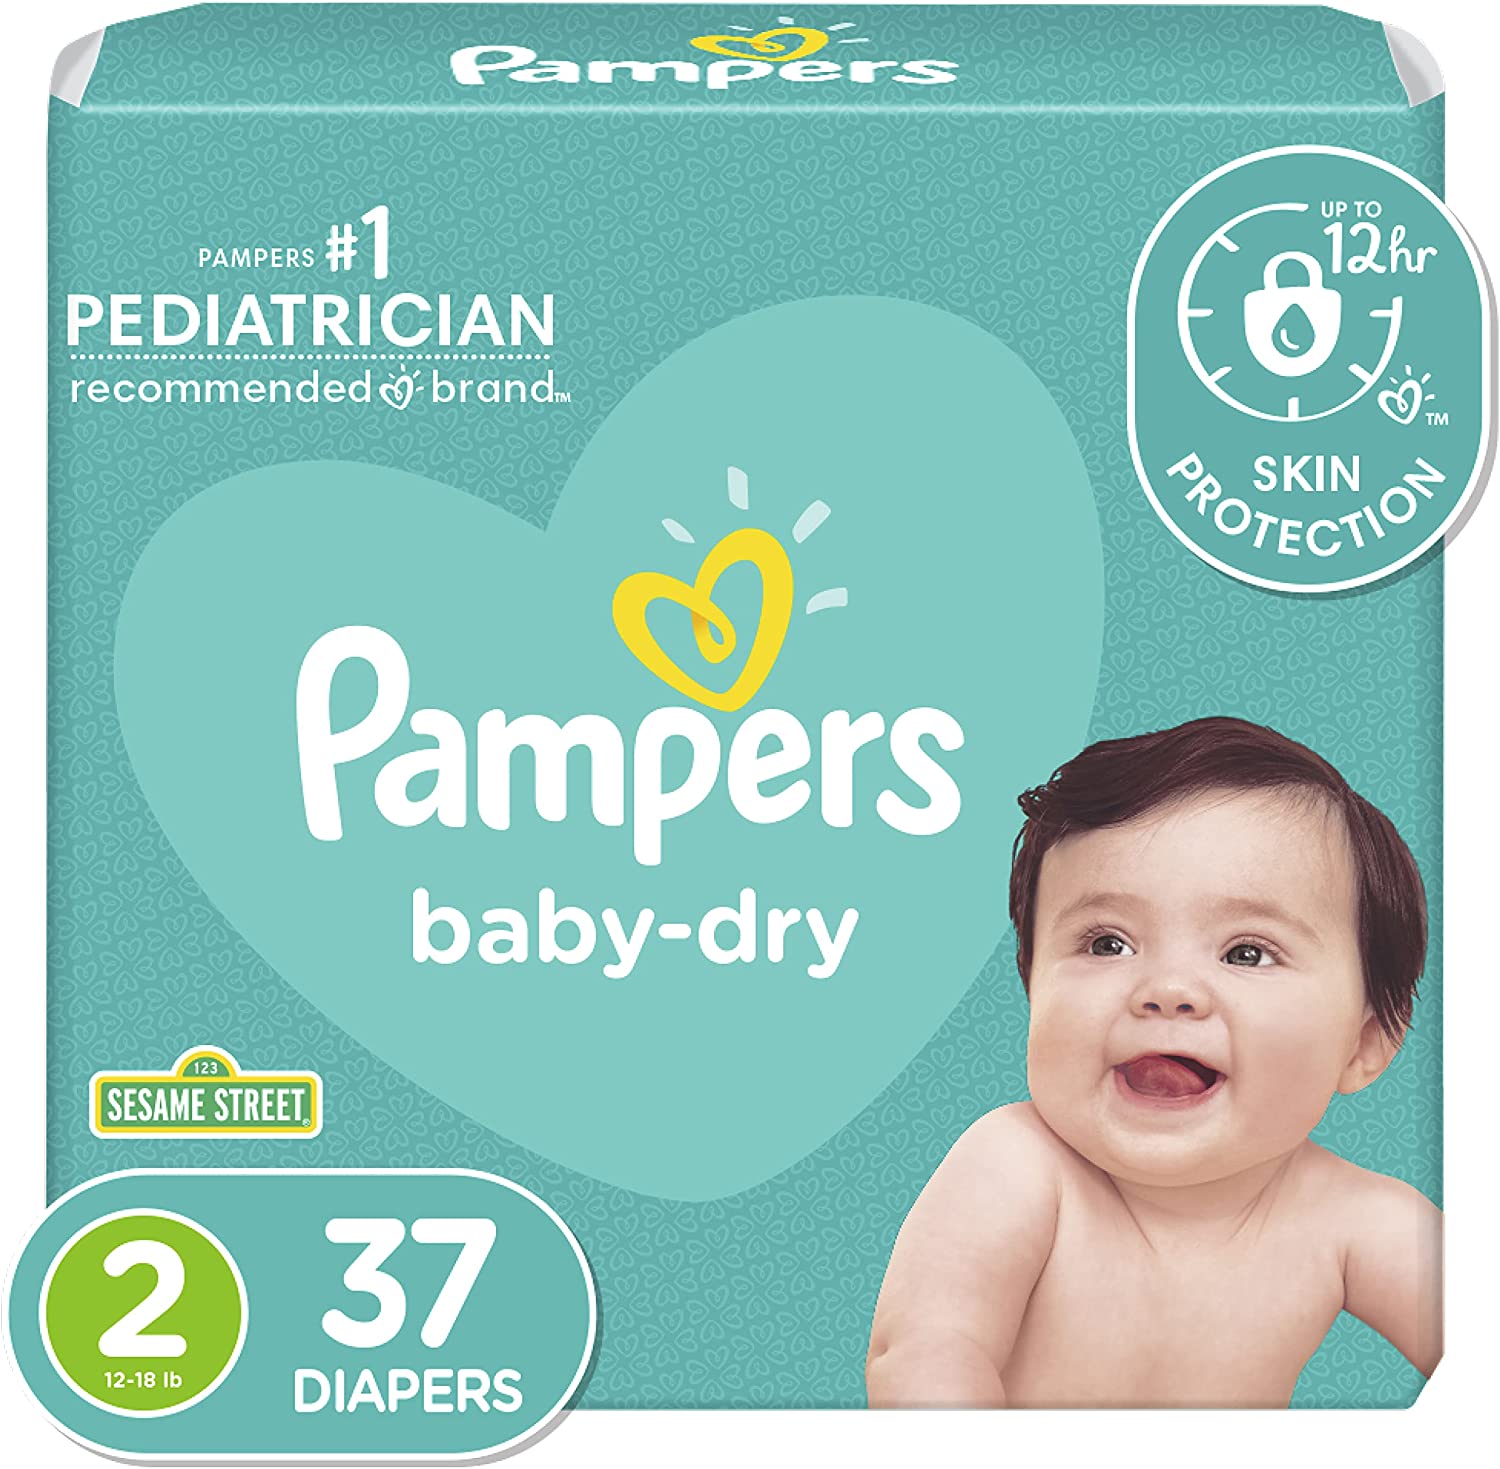 Pampers Cruisers Baby Dry Diapers, Size 2, 37 Count